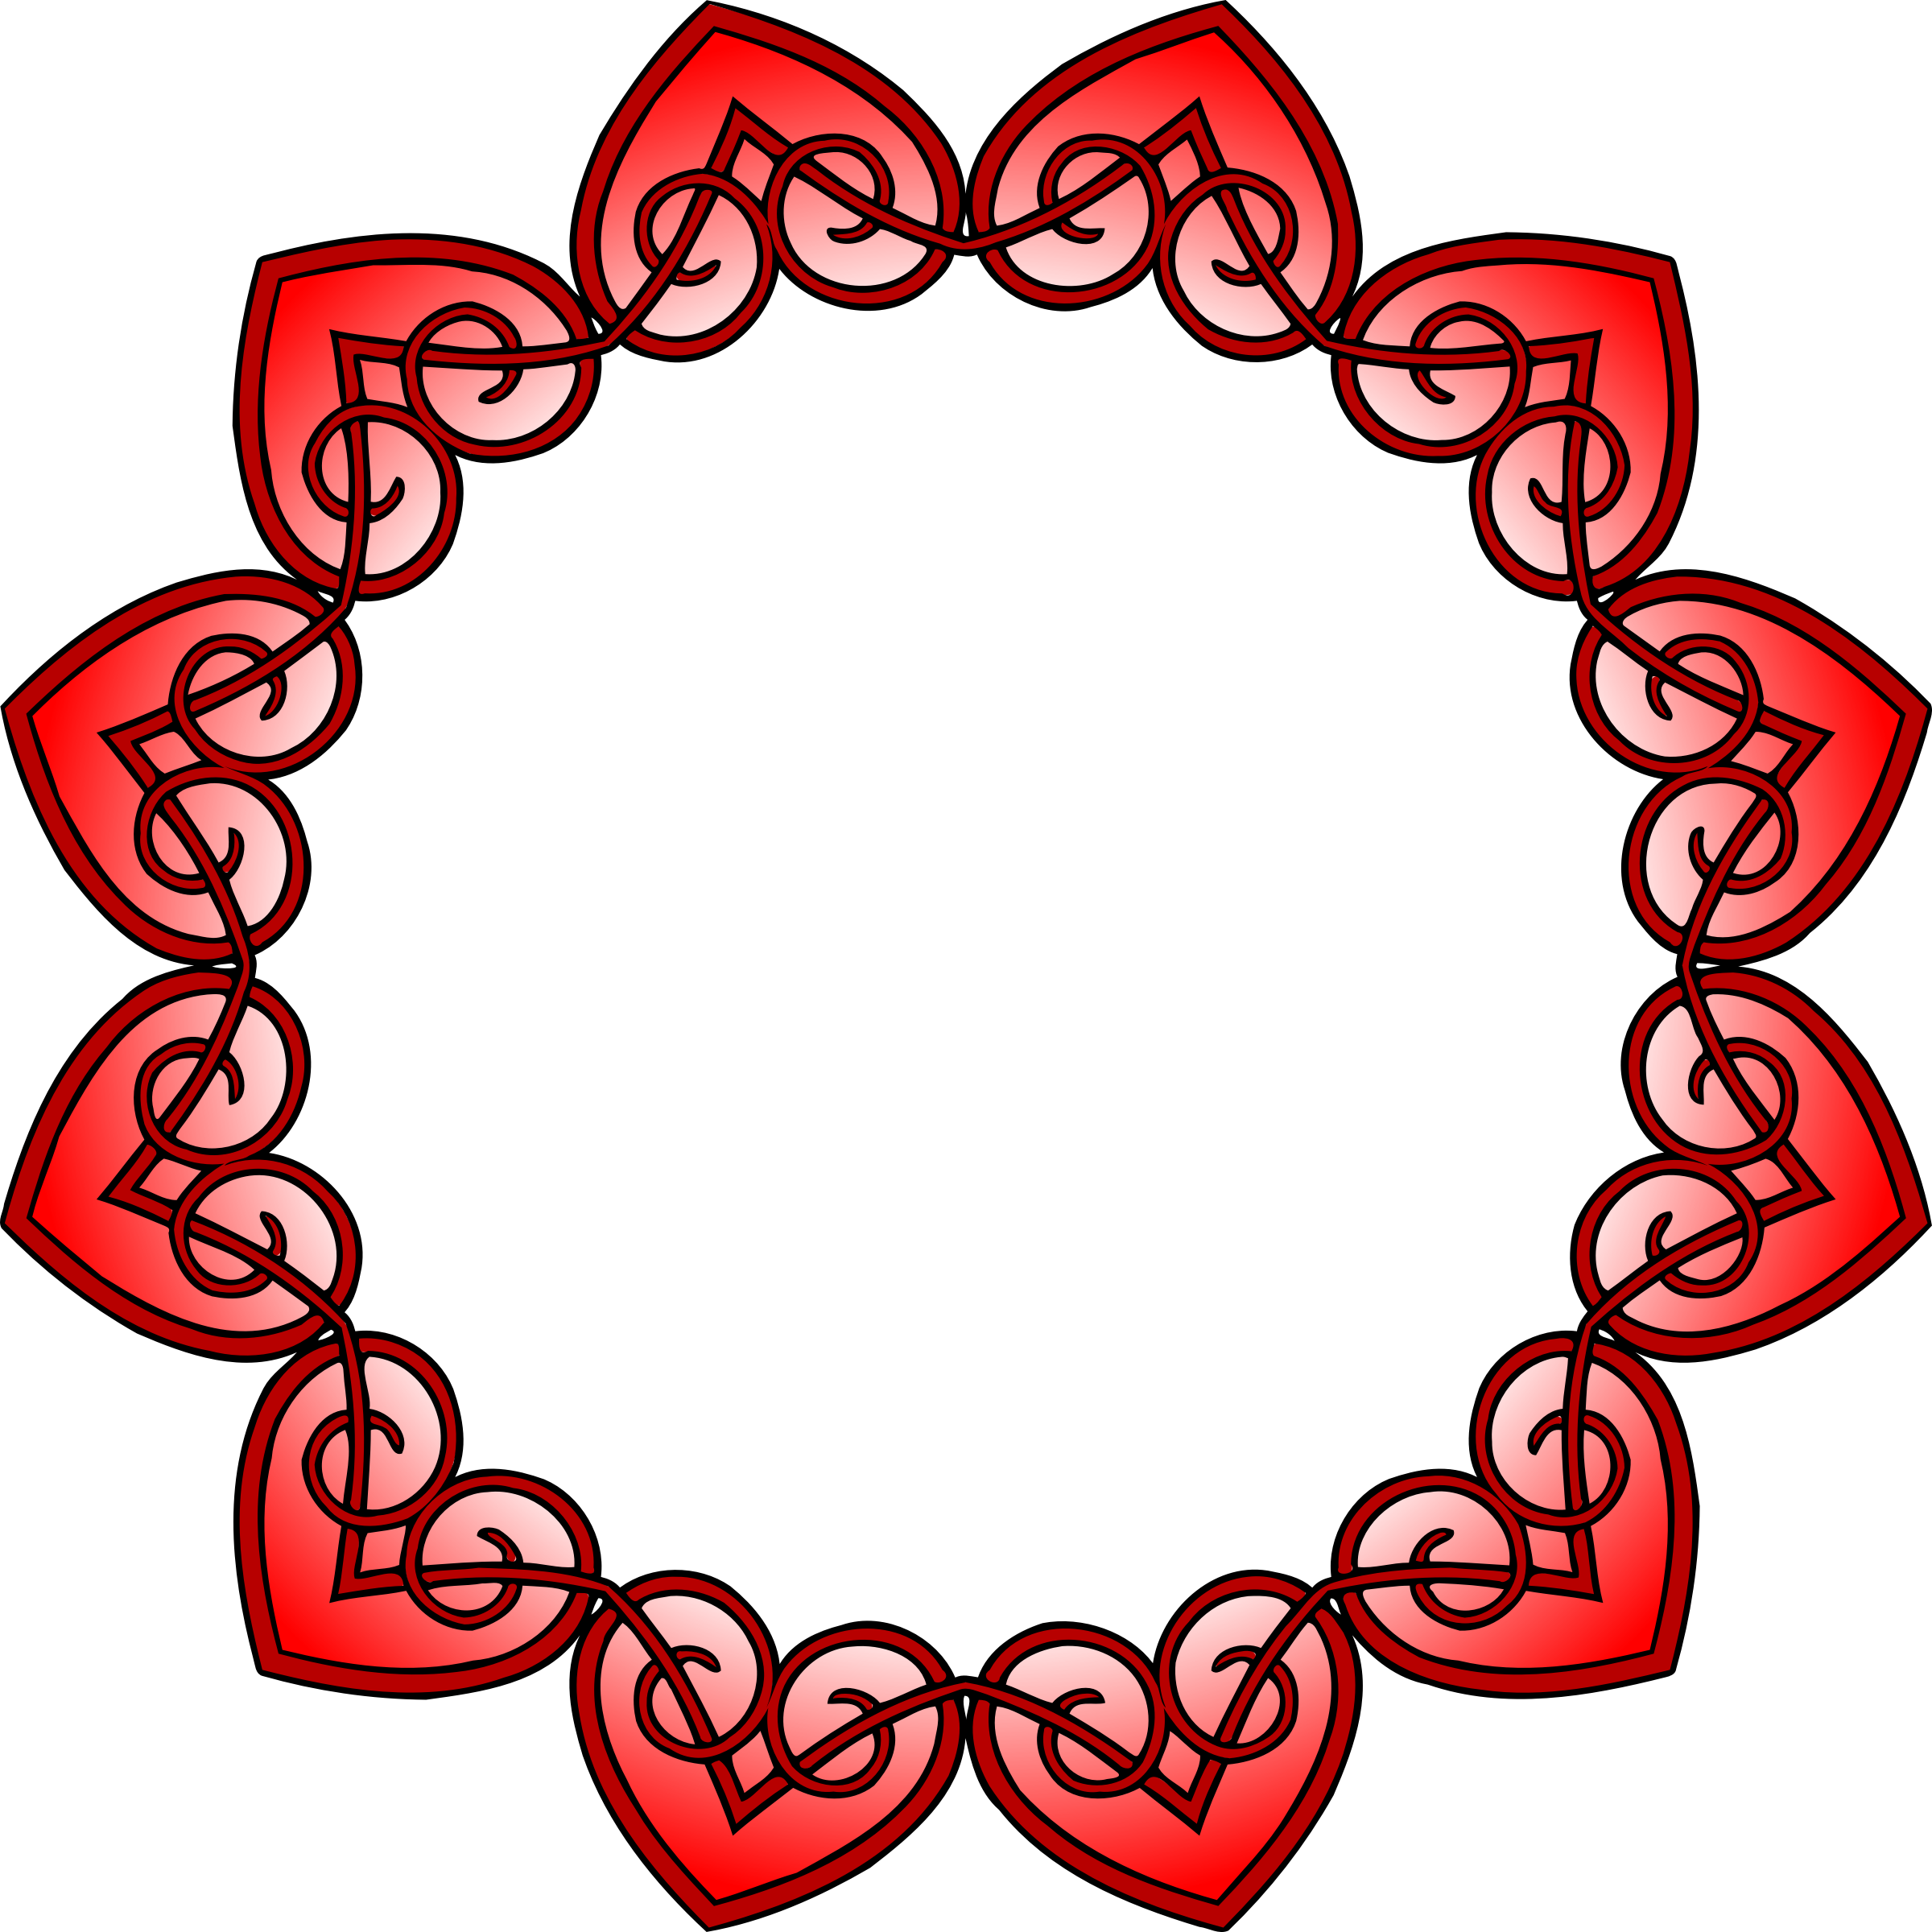 A Circular Design With Red Hearts